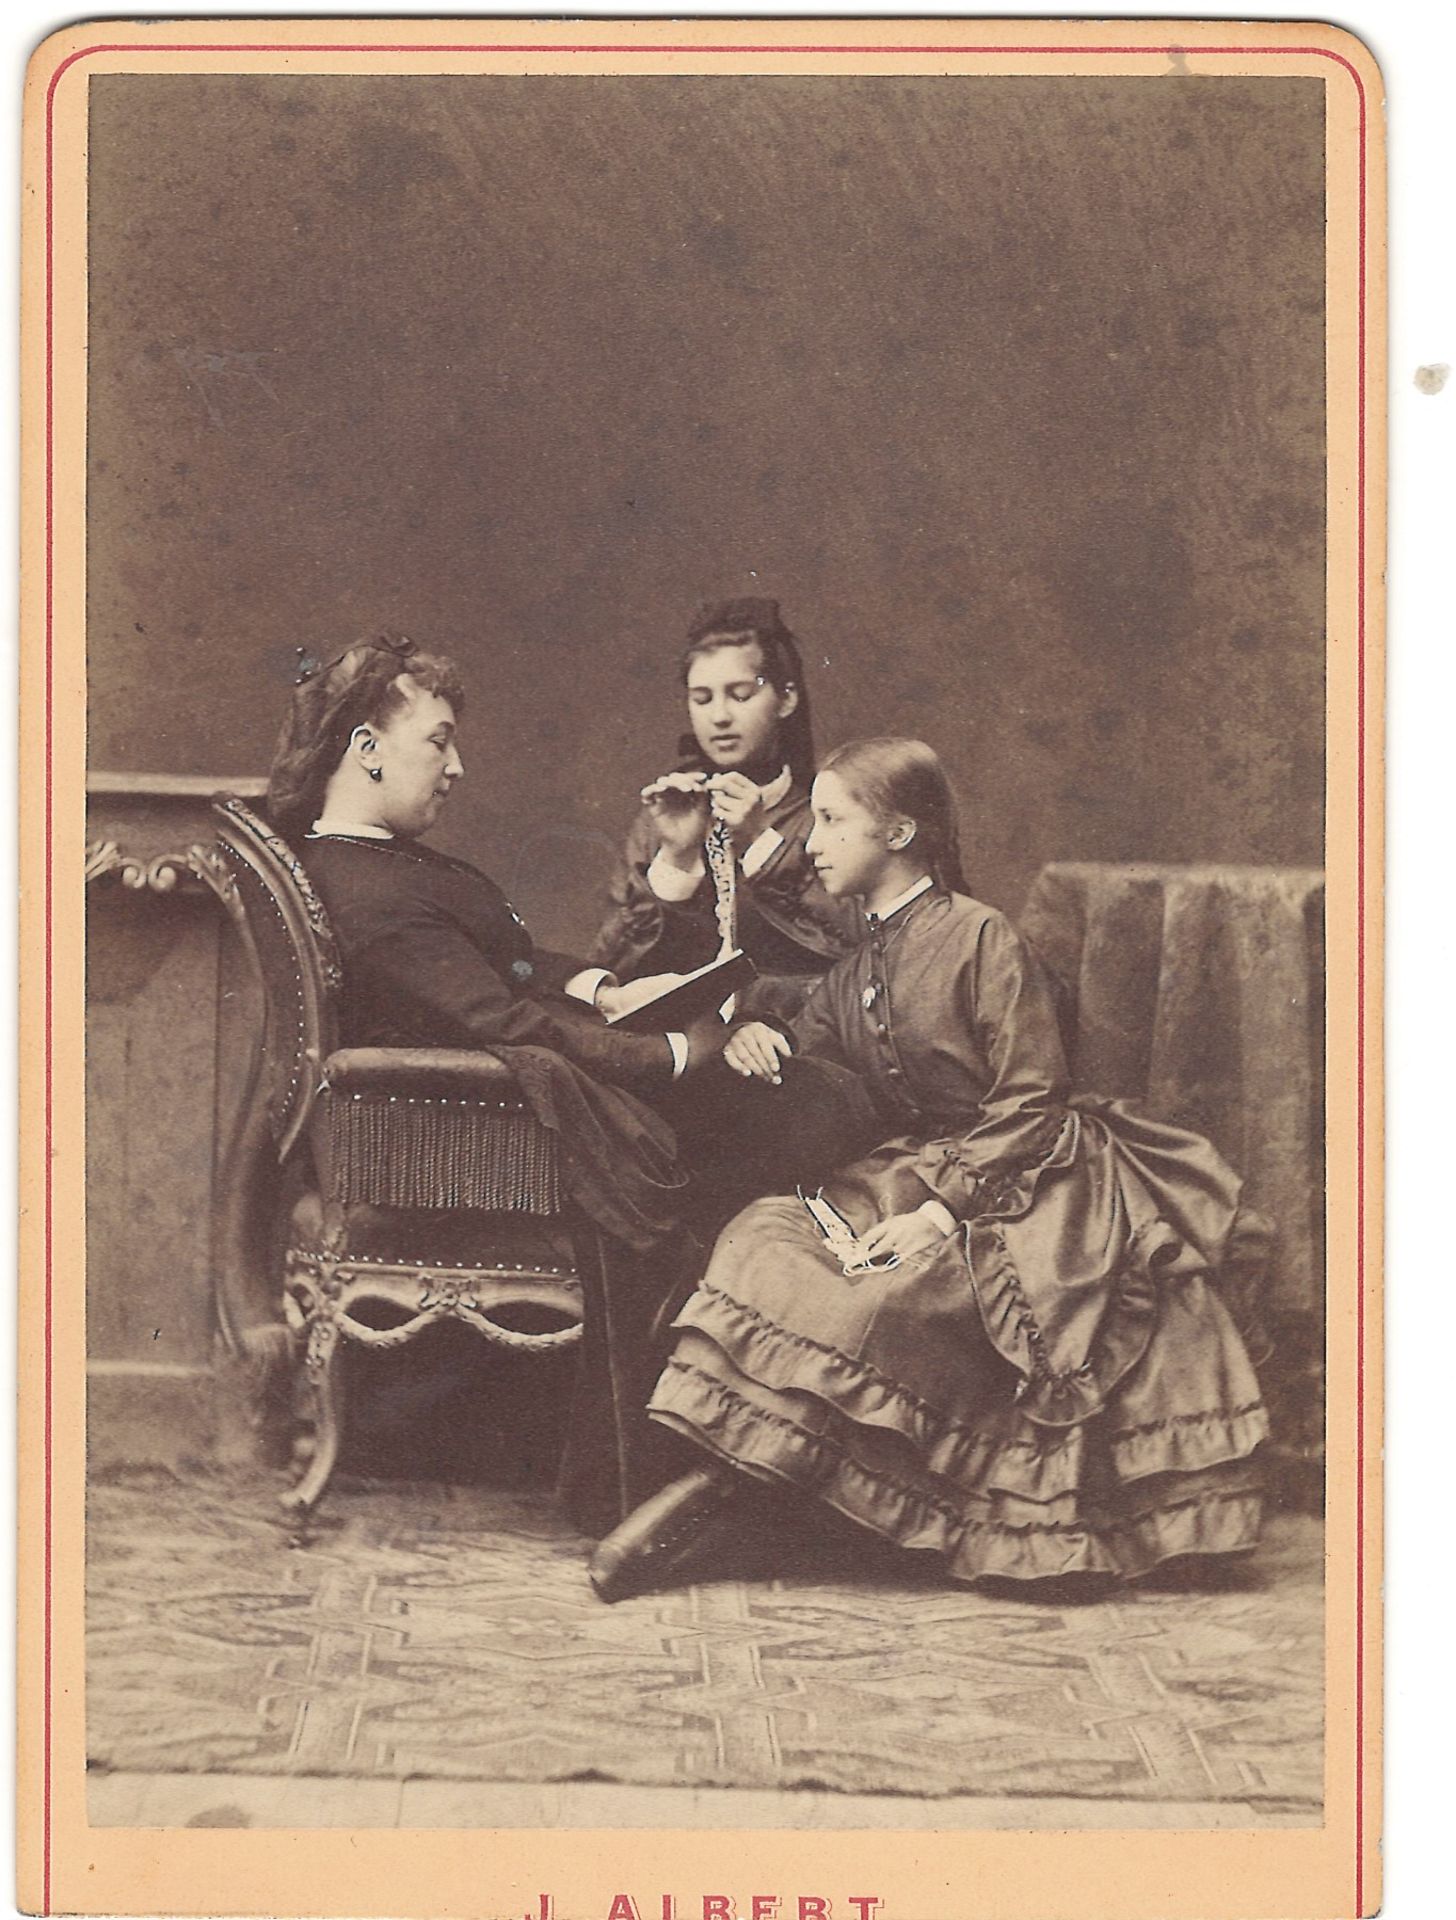 [Russian Empire]. Albert, J. Cabinet portrait of M. Peterson with daughters M. Mangel и A.K. Peterso